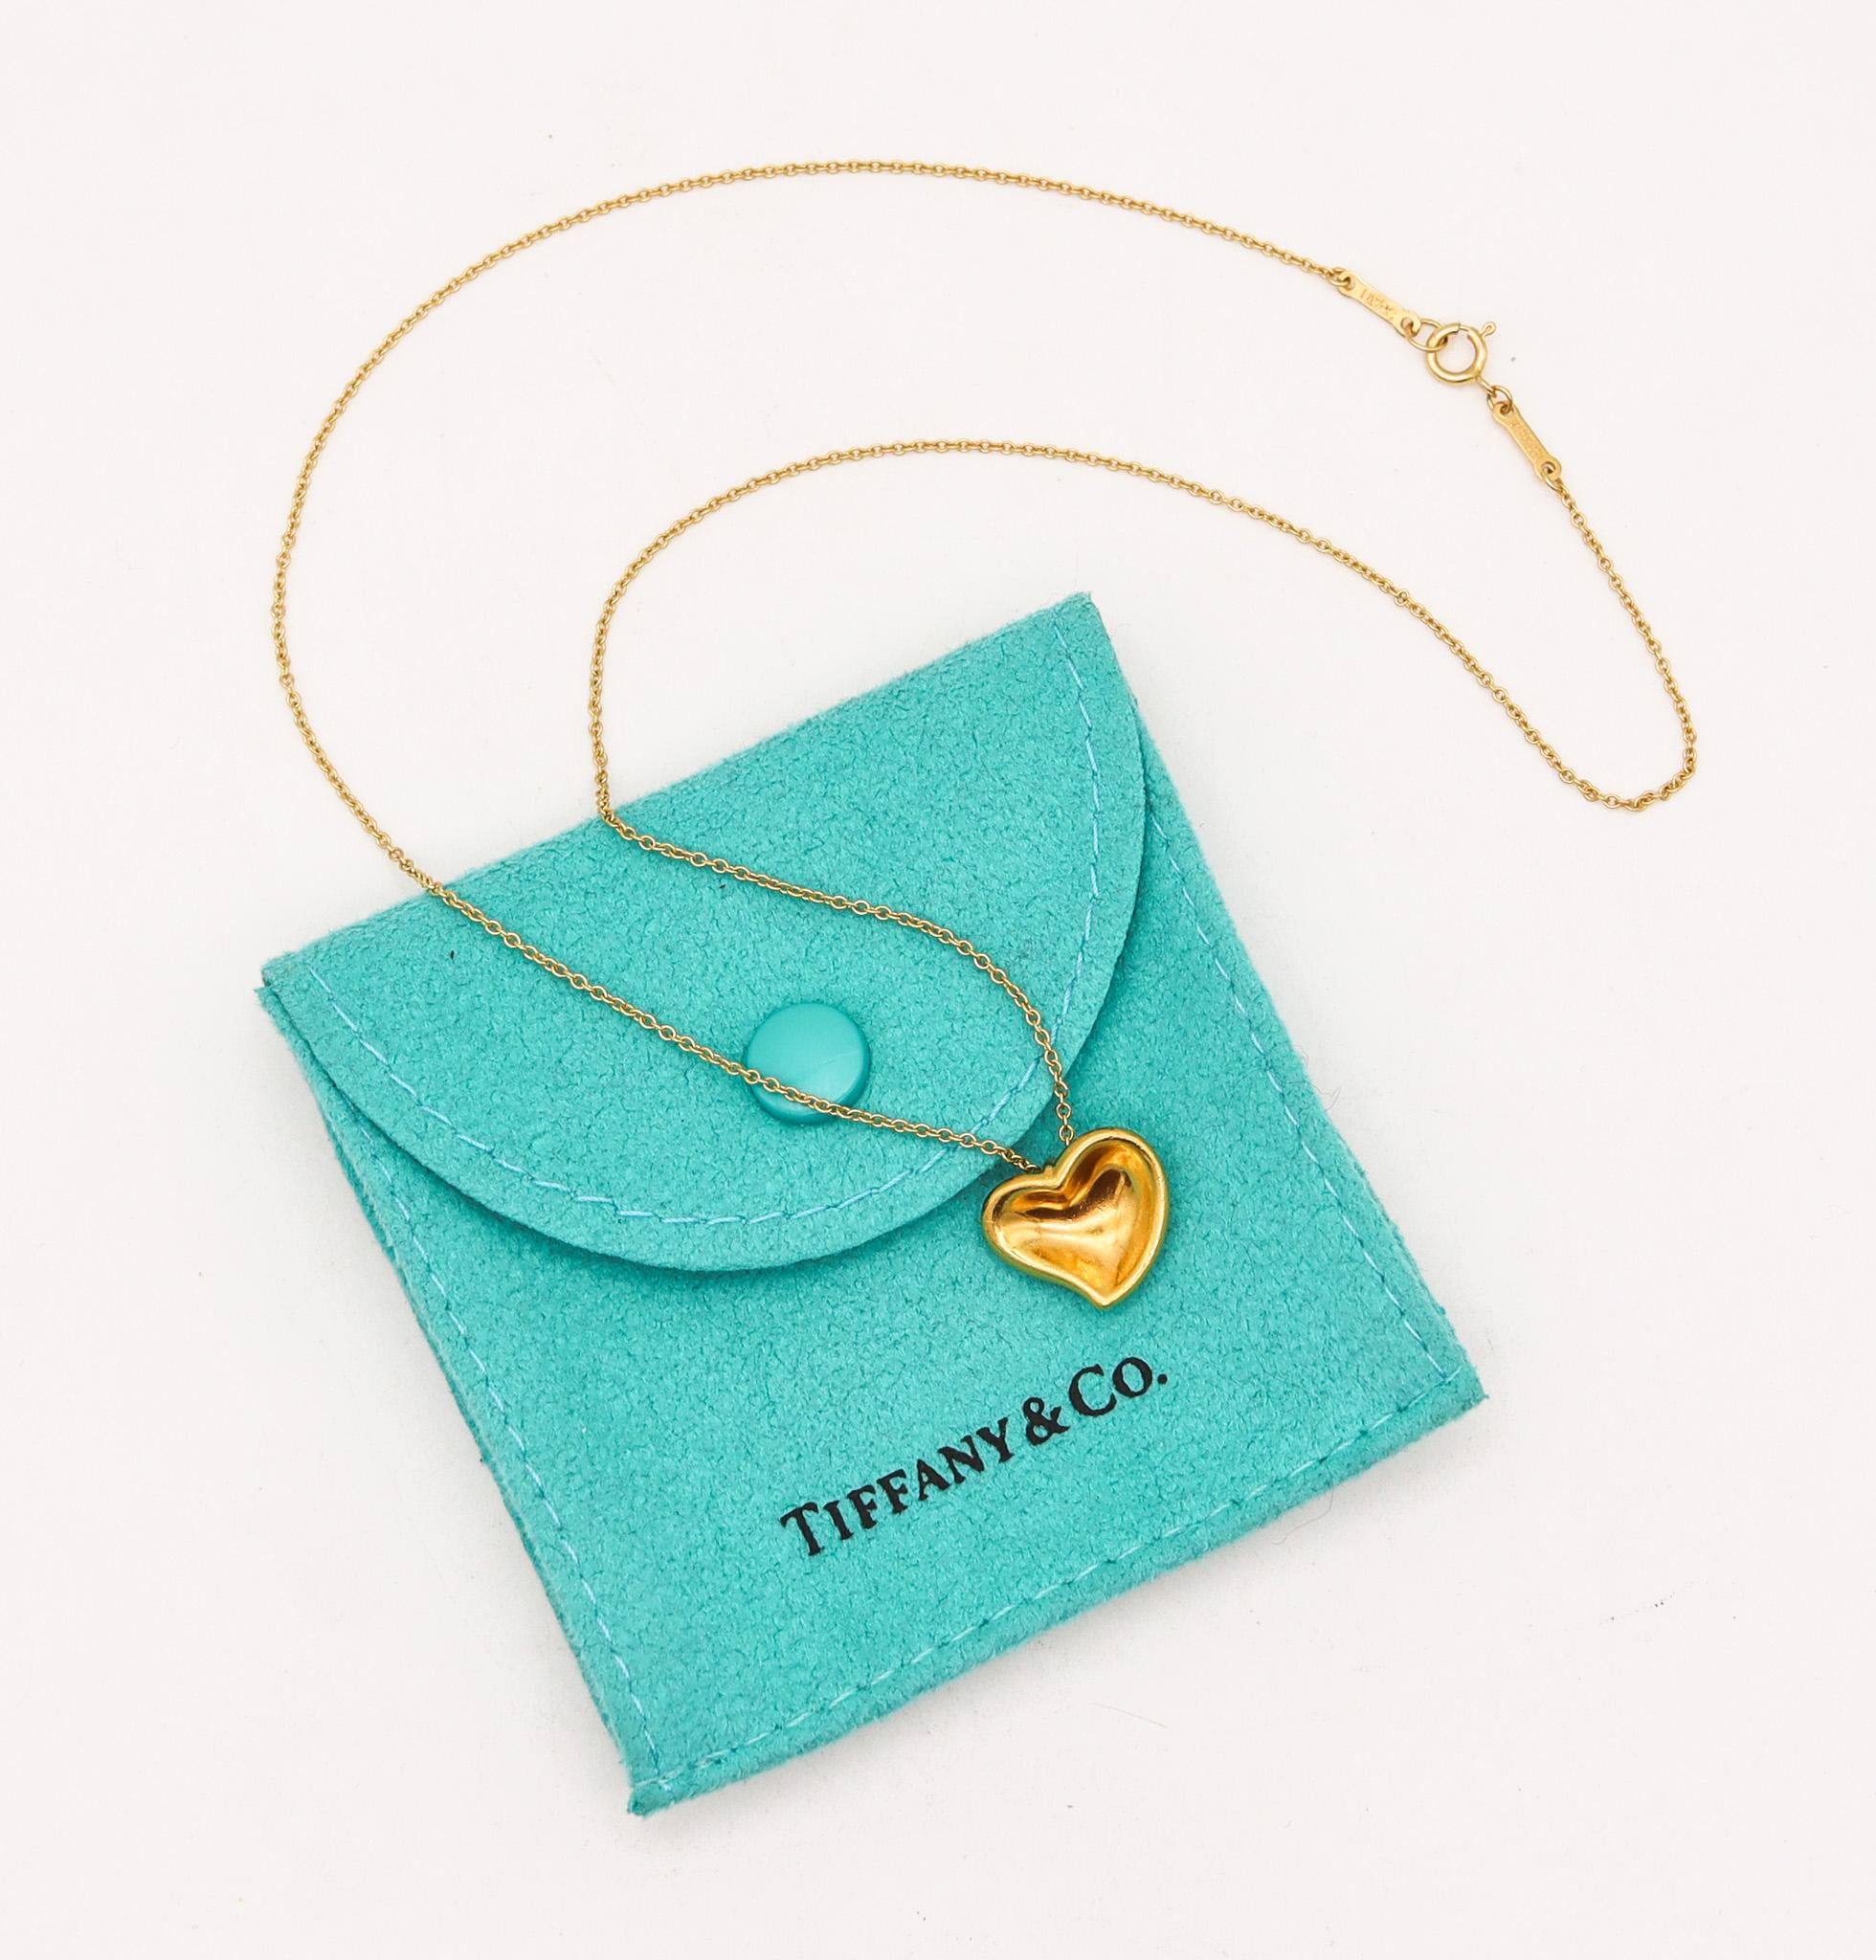 Heart necklace designed by Elsa Peretti (1940-2021) for Tiffany & Co.

Very rare collector's heart necklace, created by Elsa Peretti for the Tiffany & Co. studios. This piece has been crafted in solid pure yellow gold of 24 karats hanging from the